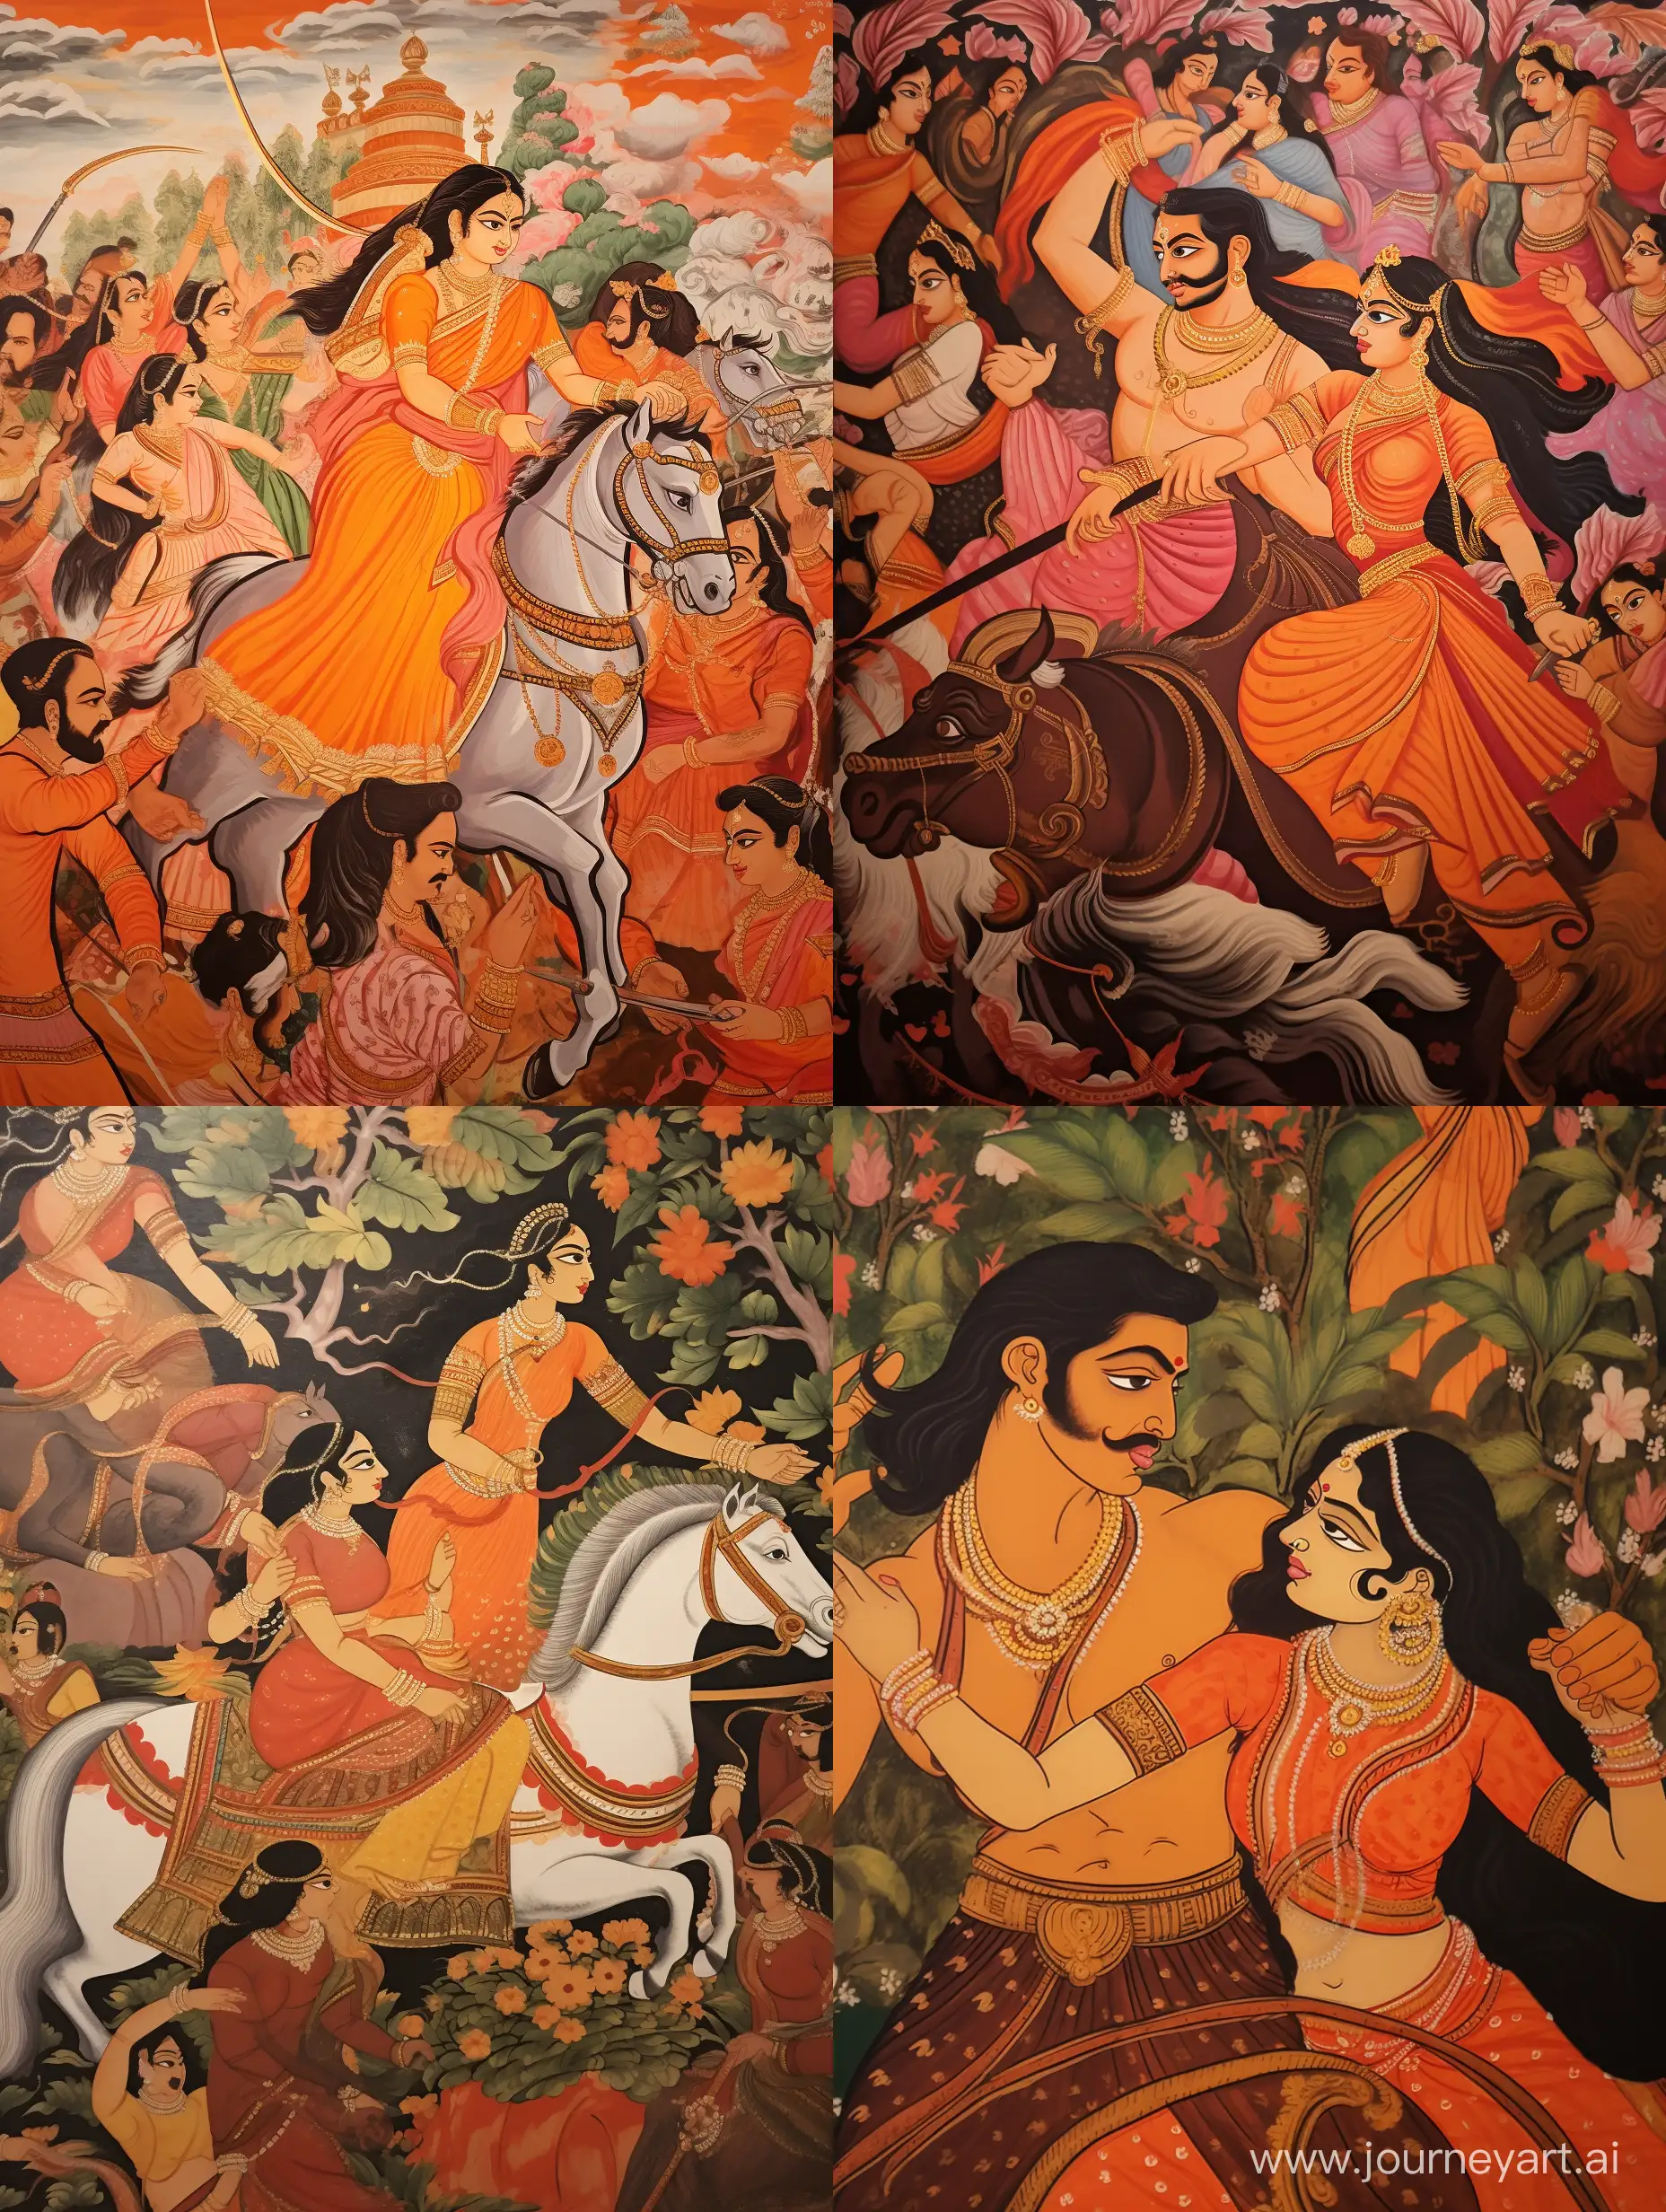 Dramatic-Depiction-of-Prince-Indrajit-Threatening-Goddess-Sita-with-a-Shining-Sword